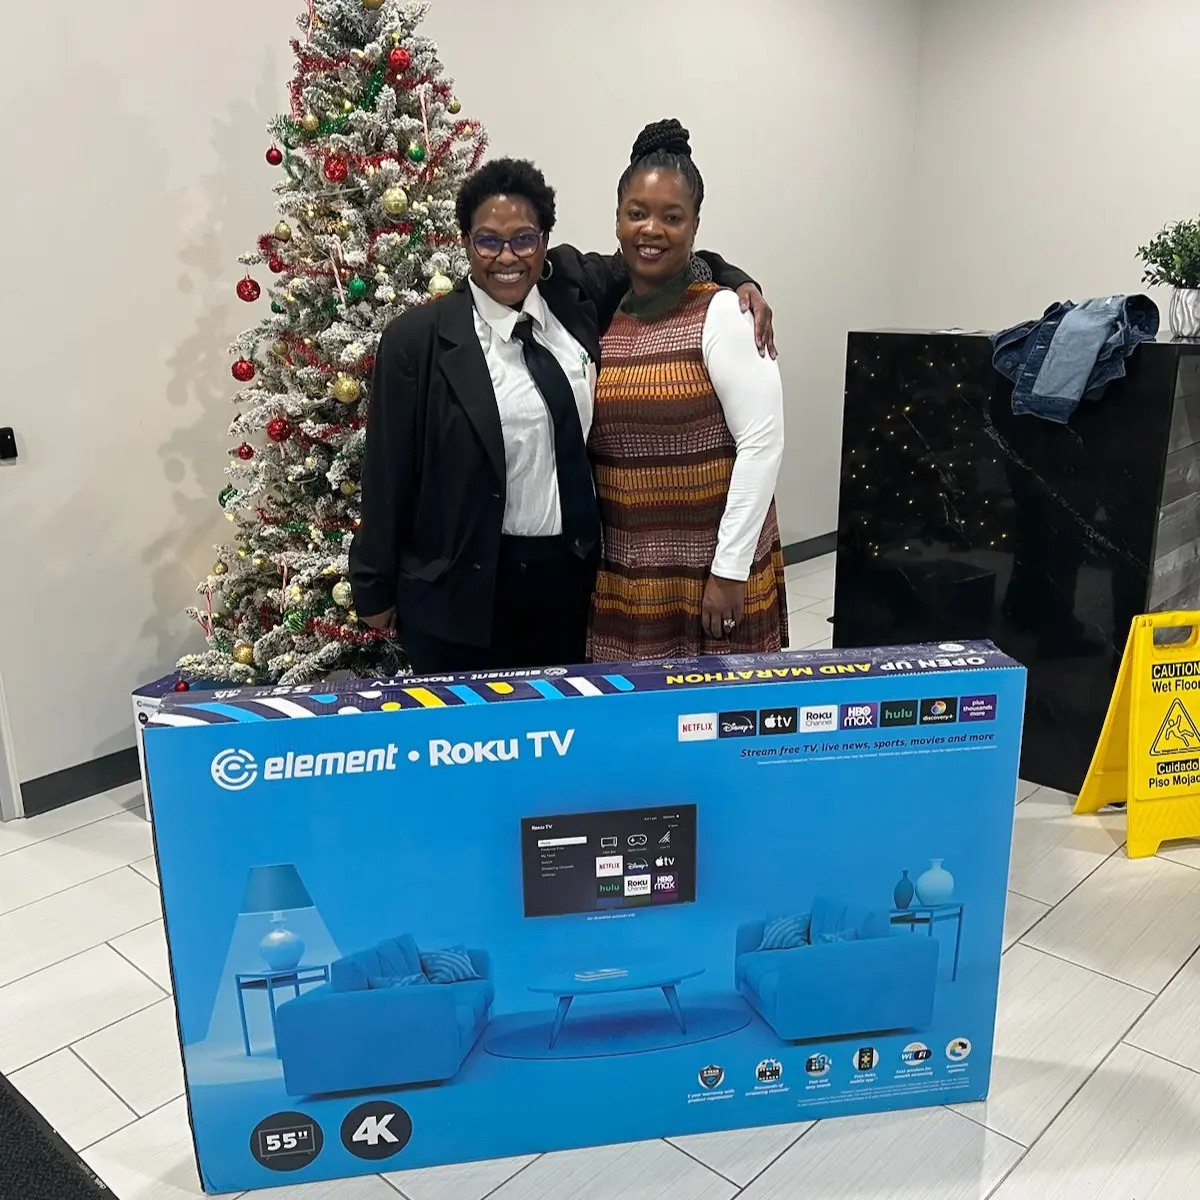 Two women hugging and posing with an Element TV box